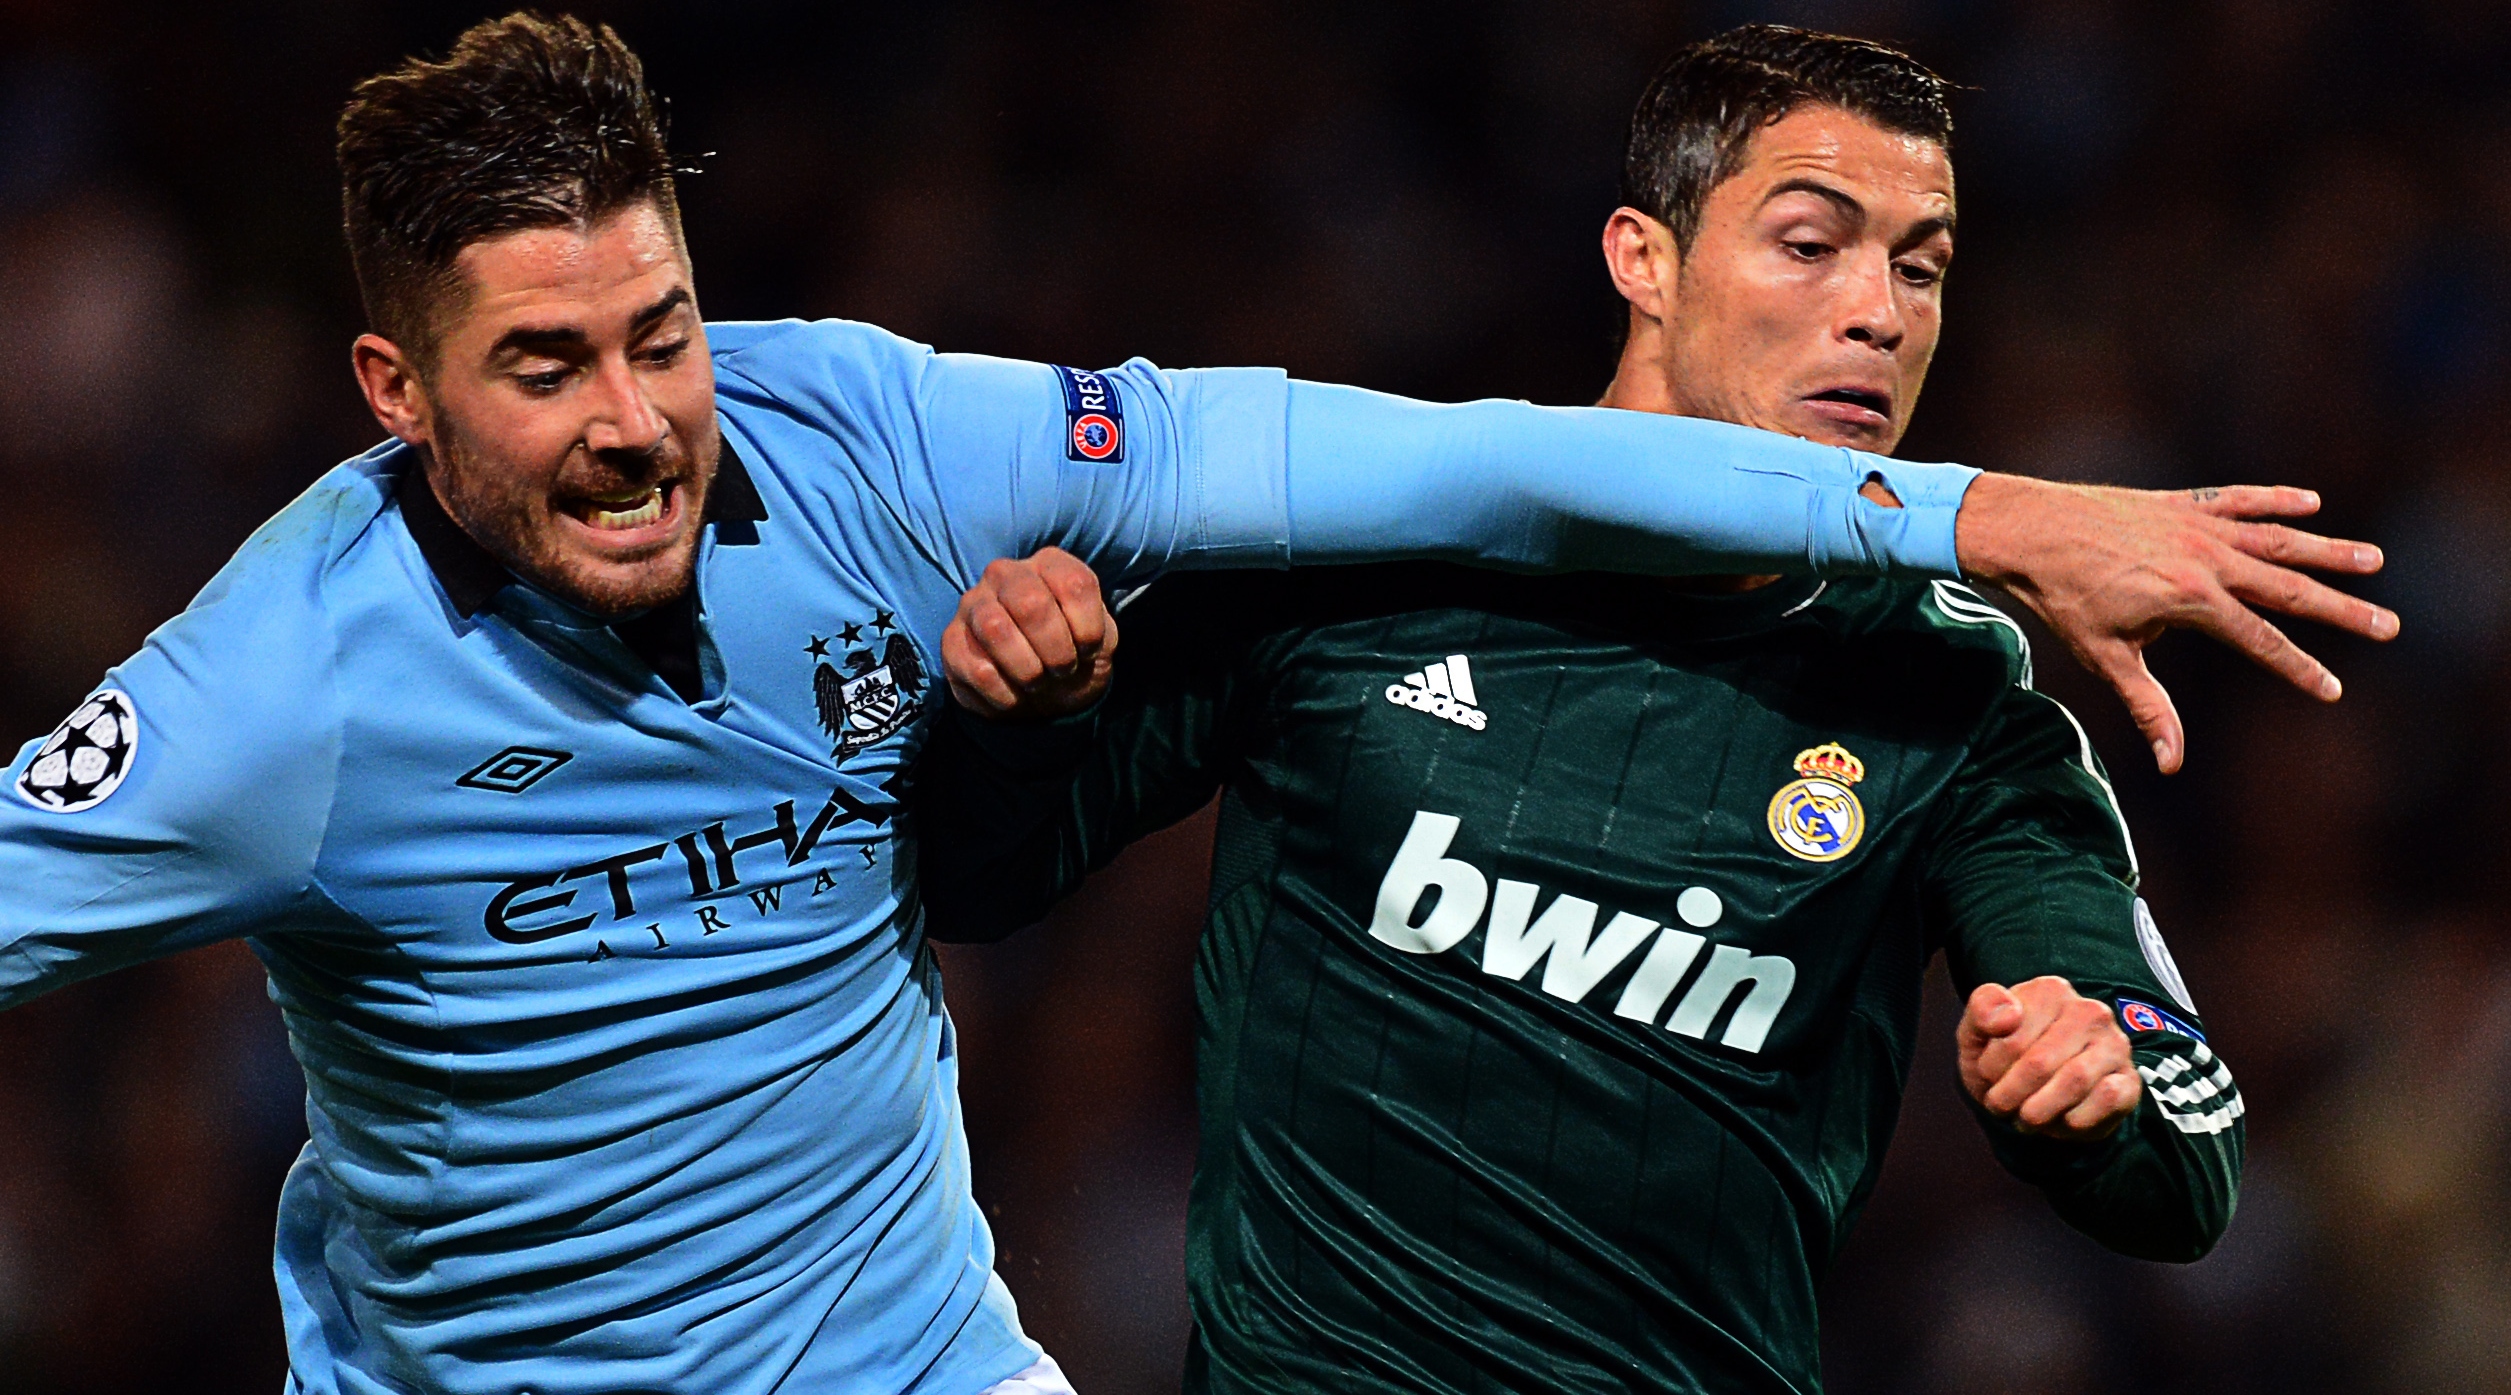 Real Madrid's Portuguese forward Cristiano Ronaldo (R) vies with Manchester City's Spanish midfielder Javi Garcia during the UEFA Champions League group D football match between Manchester City and Real Madrid at The Etihad Stadium in Manchester, north-west England, on November 21, 2012. AFP PHOTO / PAUL ELLIS (Photo credit should read PAUL ELLIS/AFP via Getty Images)